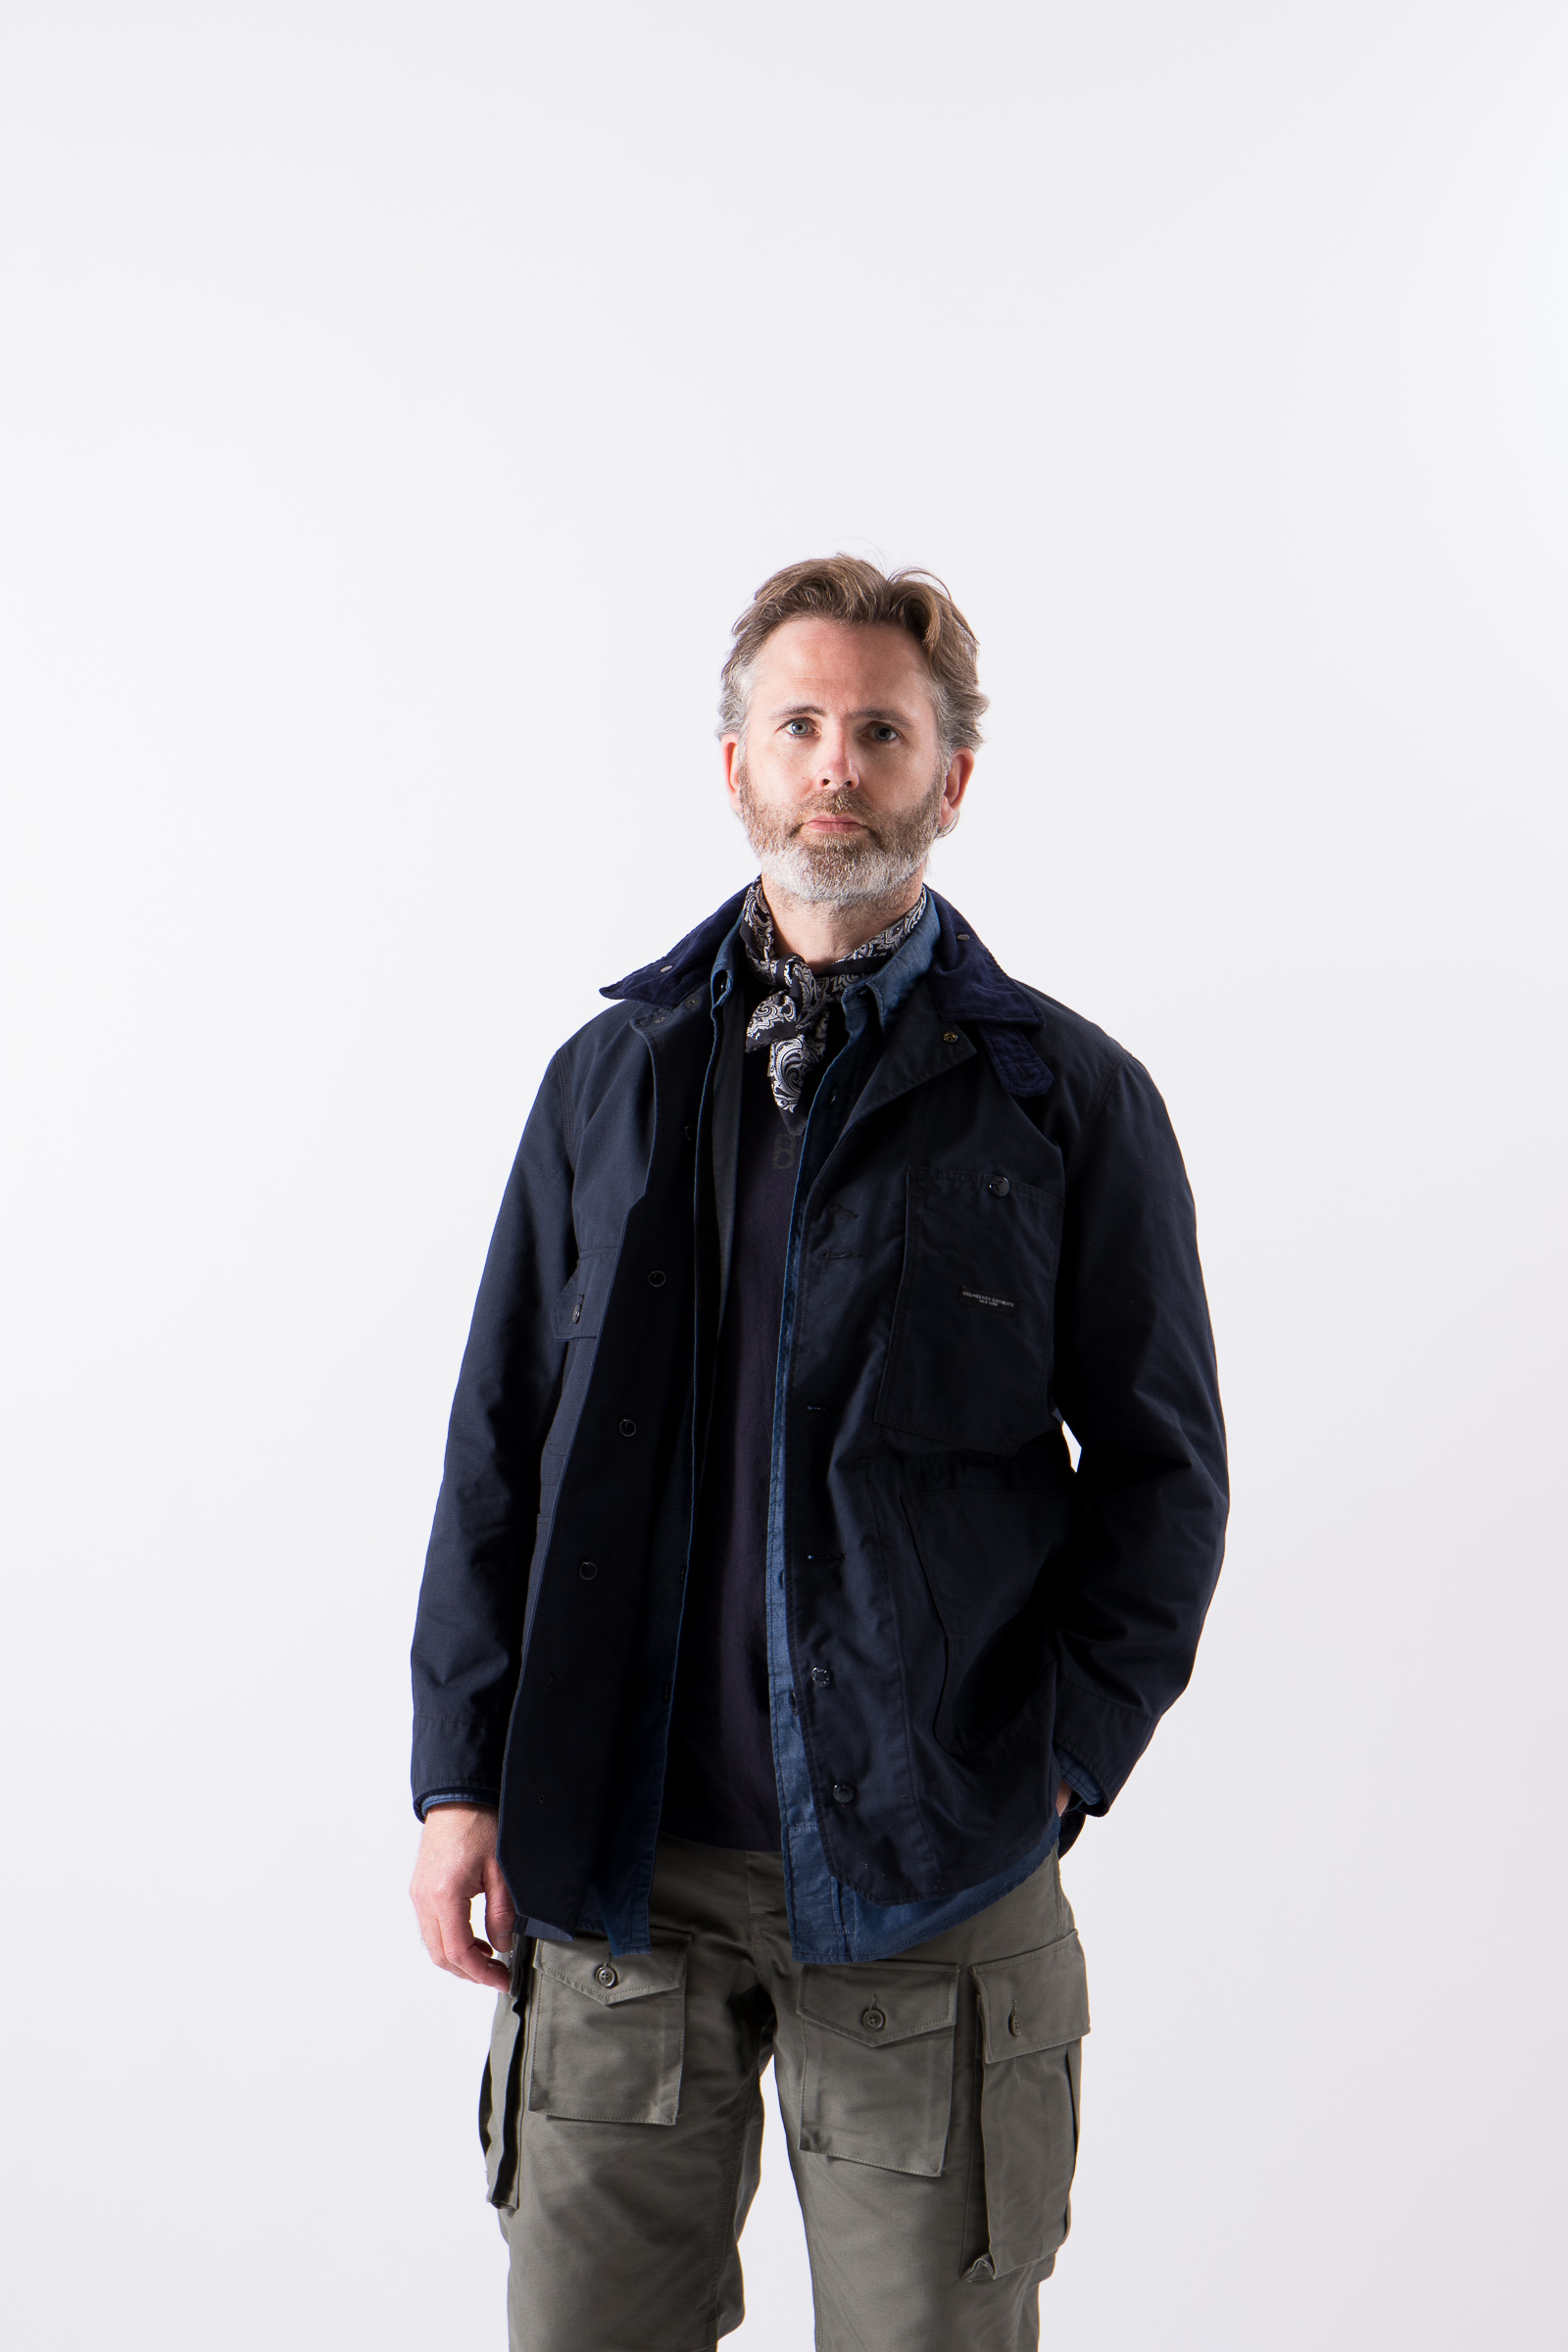 ENGINEERED GARMENTS AW20 DELIVERY 1 - The Bureau Belfast